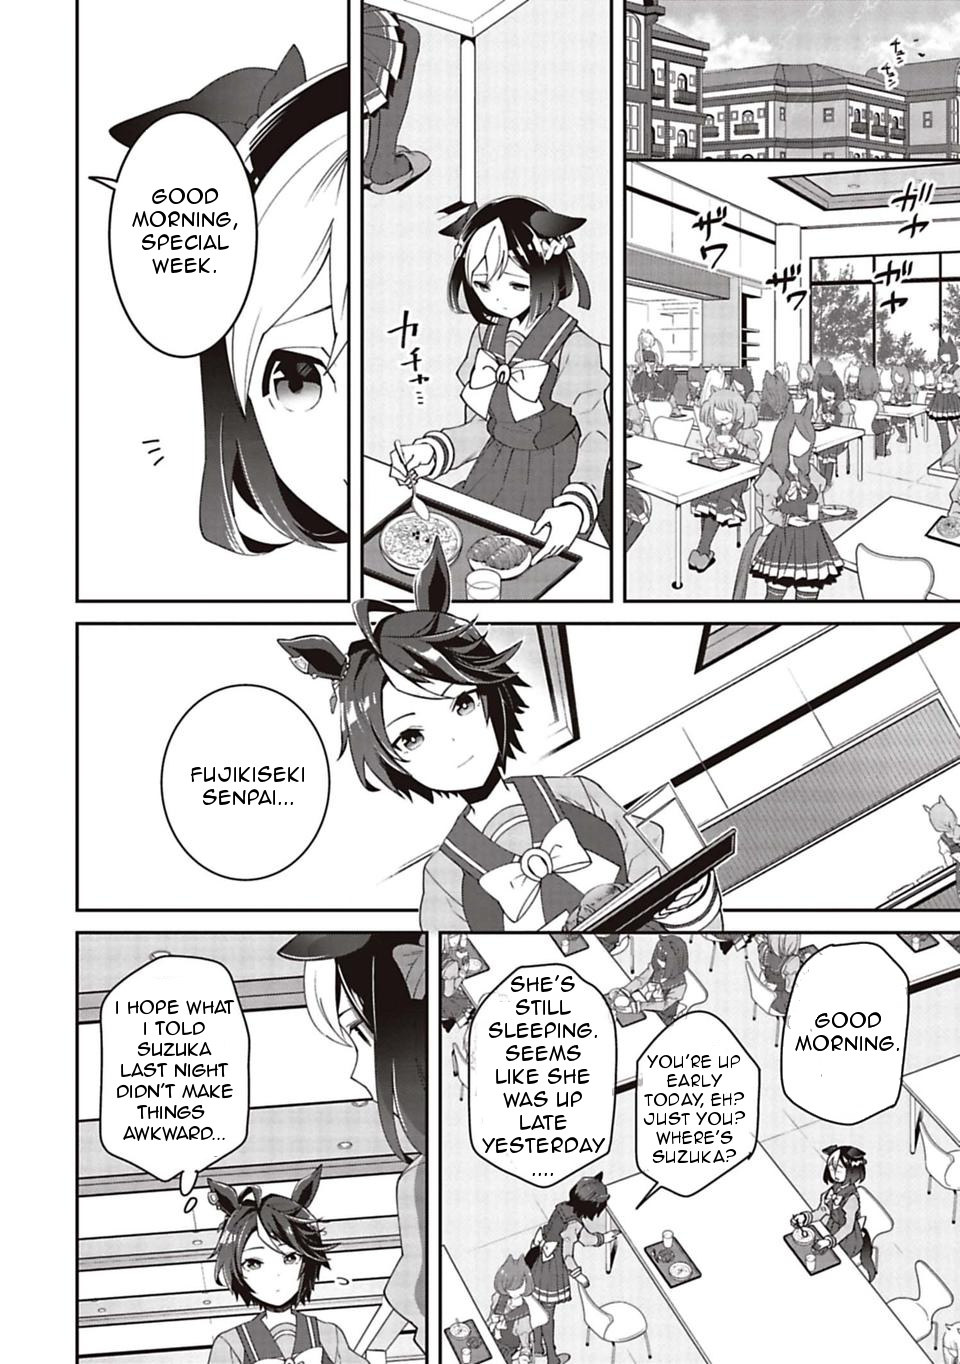 Starting Gate! Uma Musume Pretty Derby Vol.1 Chapter 6: The Distance Between Two People 3 - Picture 2